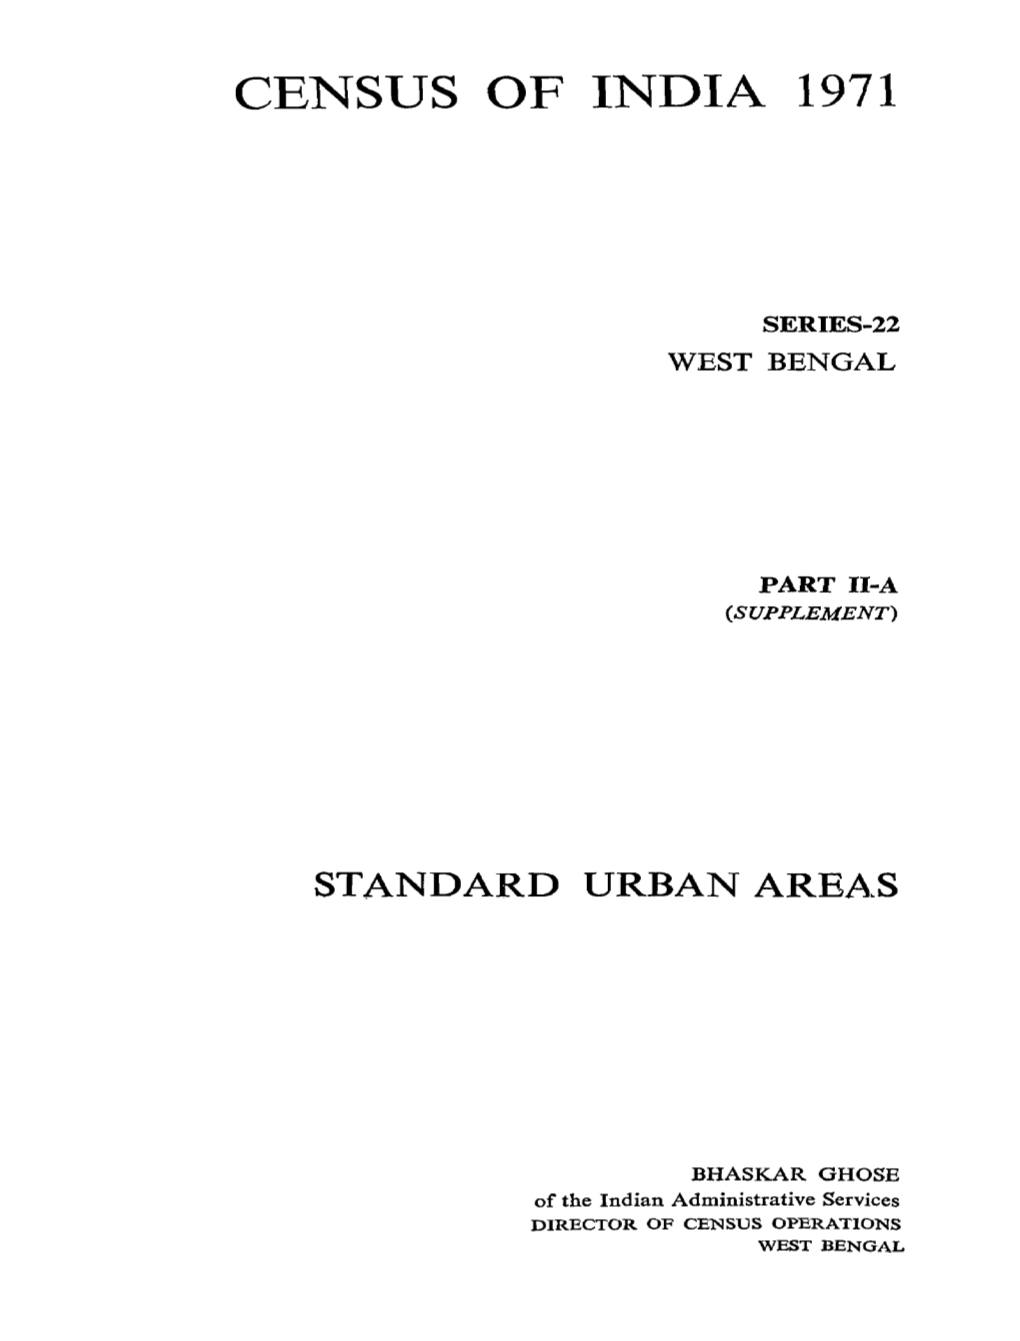 Standard Urban Areas, Part II-A, Series-22, West Bengal